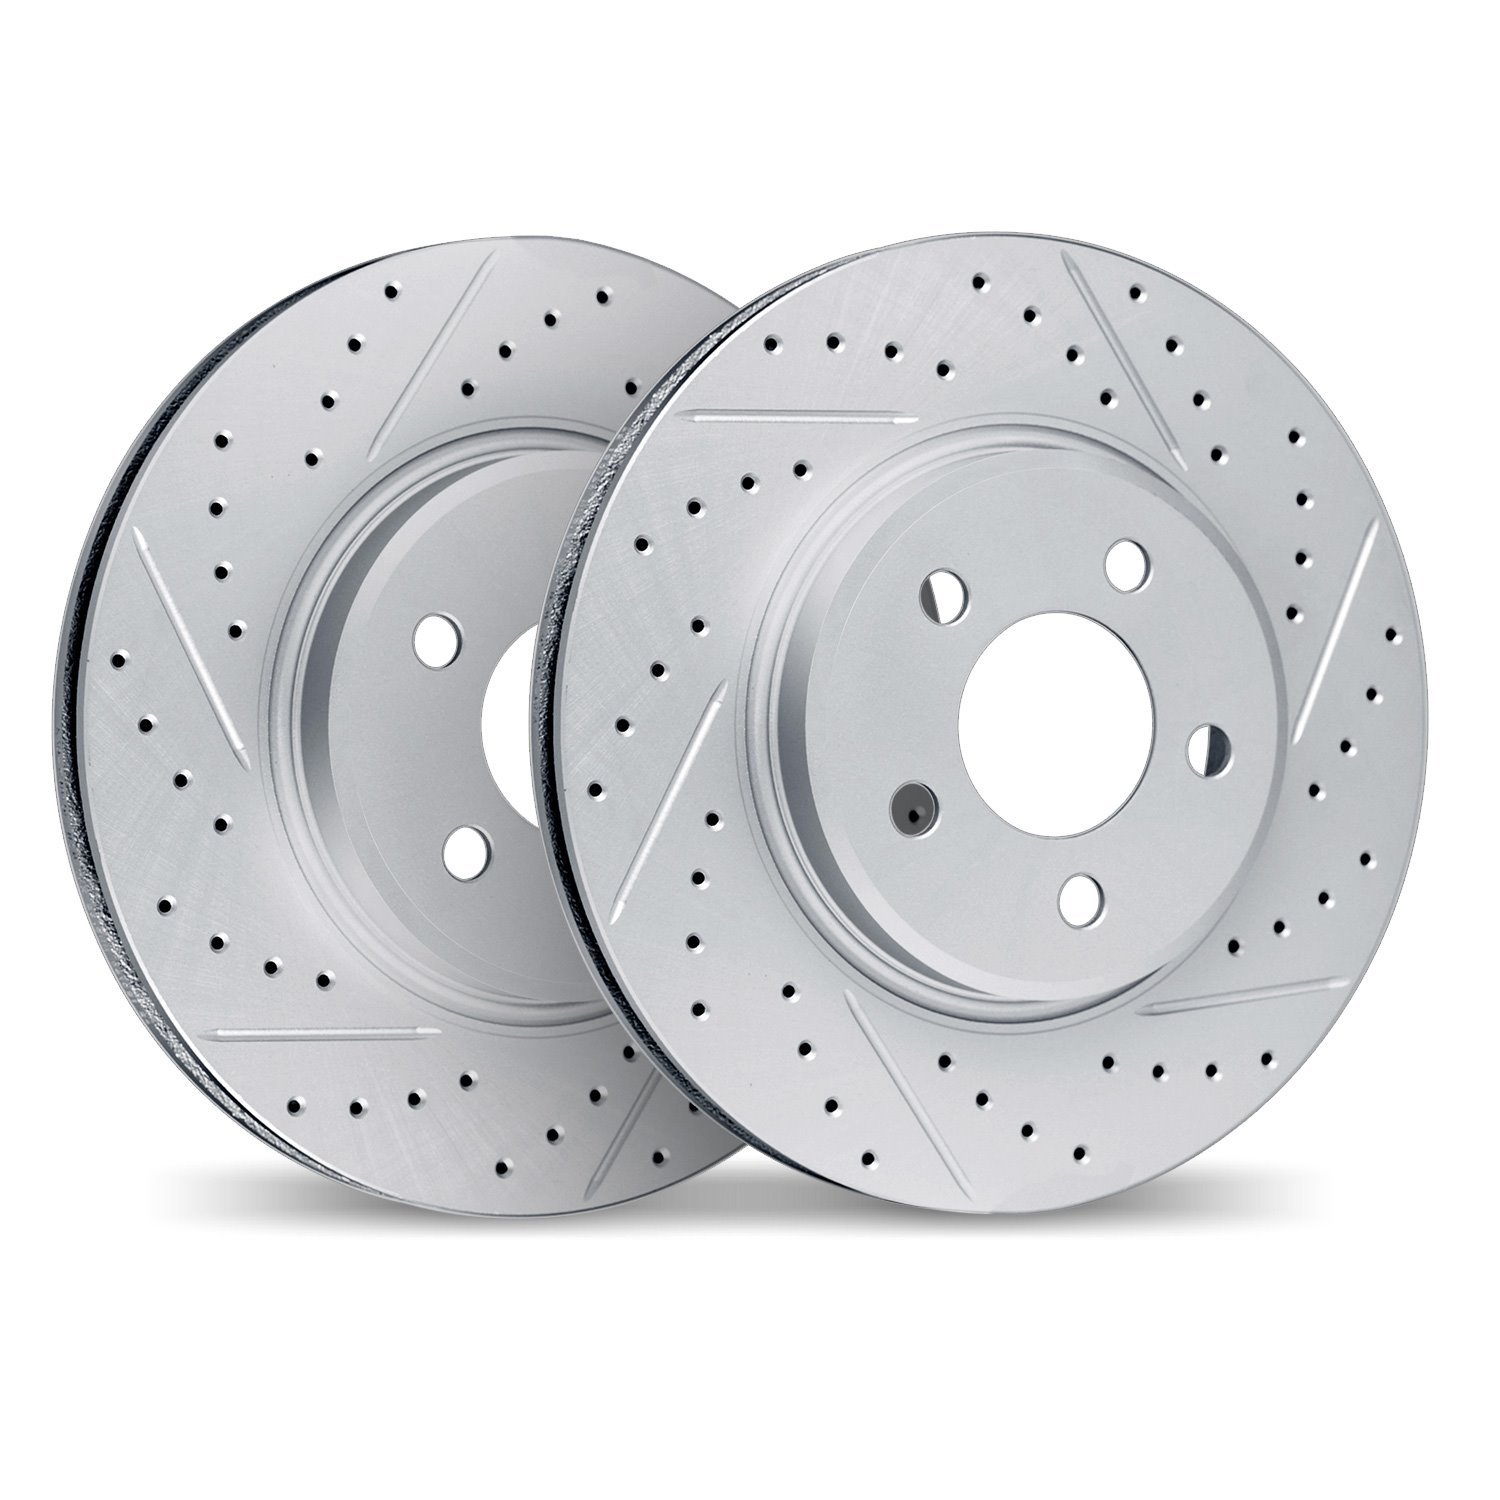 2002-27006 Geoperformance Drilled/Slotted Brake Rotors, 1995-2004 Volvo, Position: Front